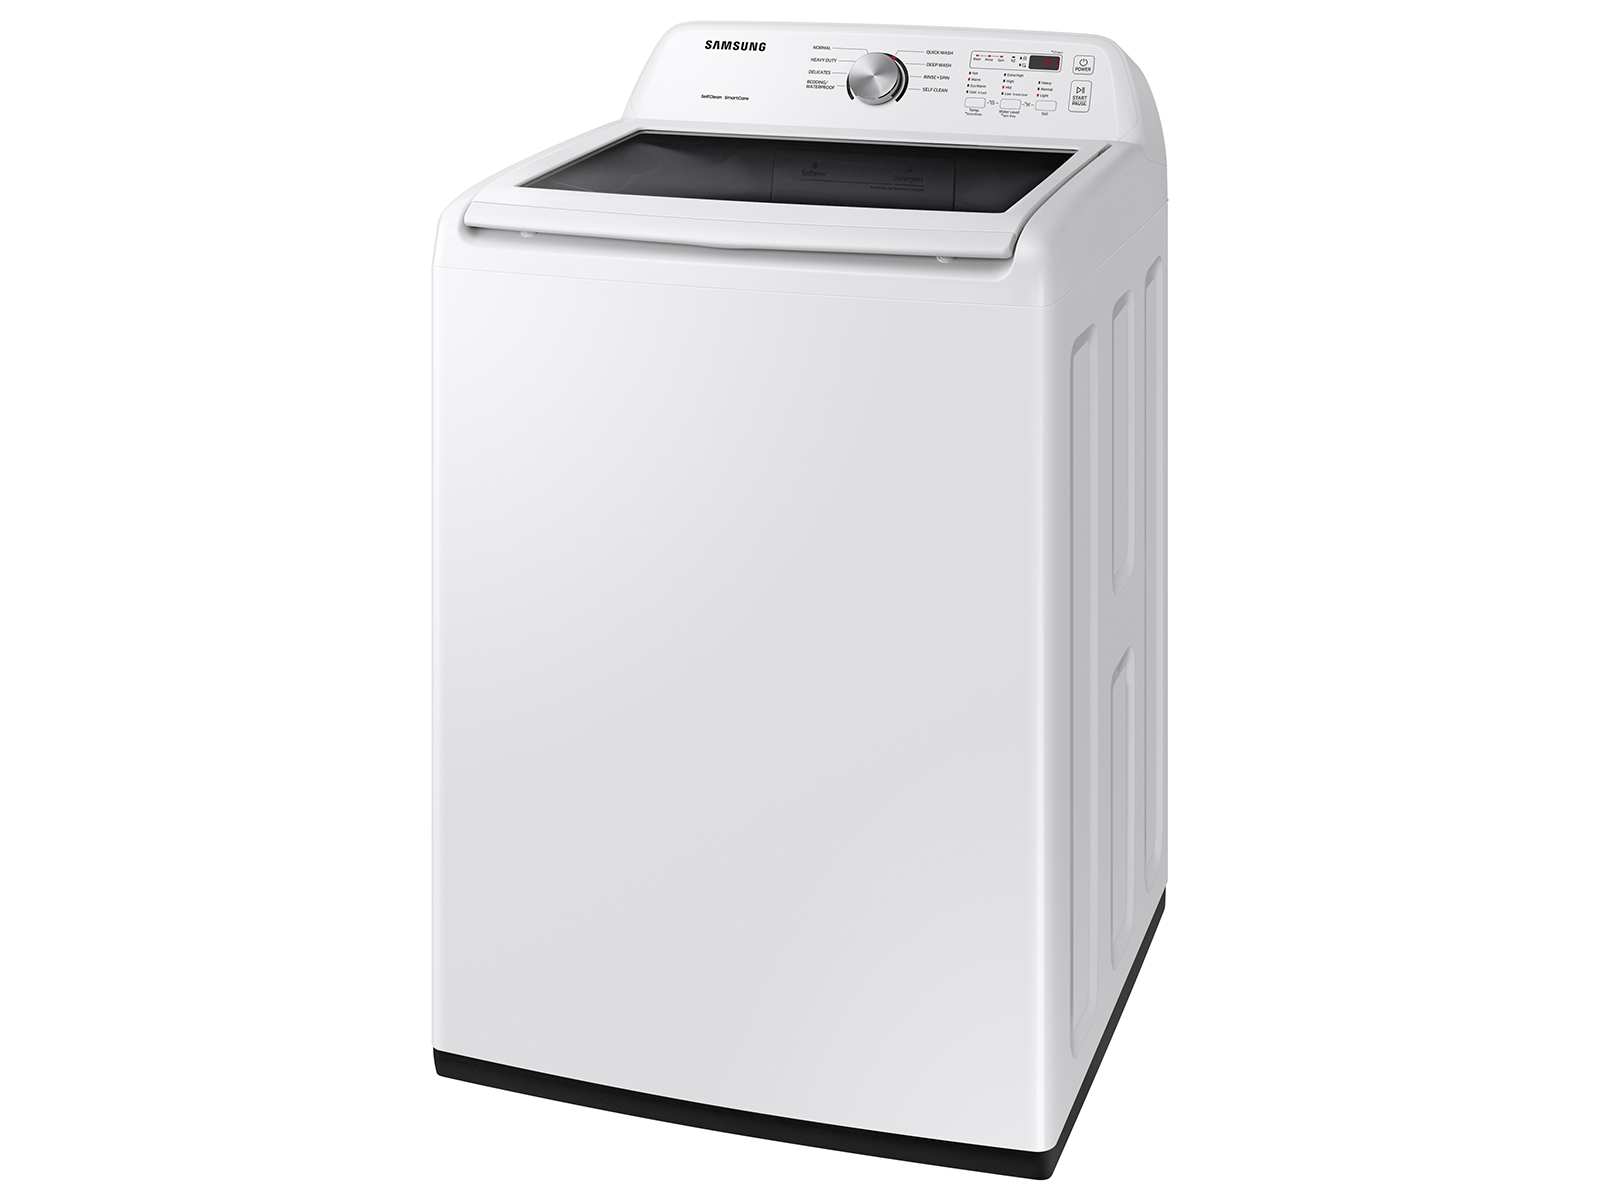 4.5 cu. ft. Capacity Top Load Washer with Vibration Reduction